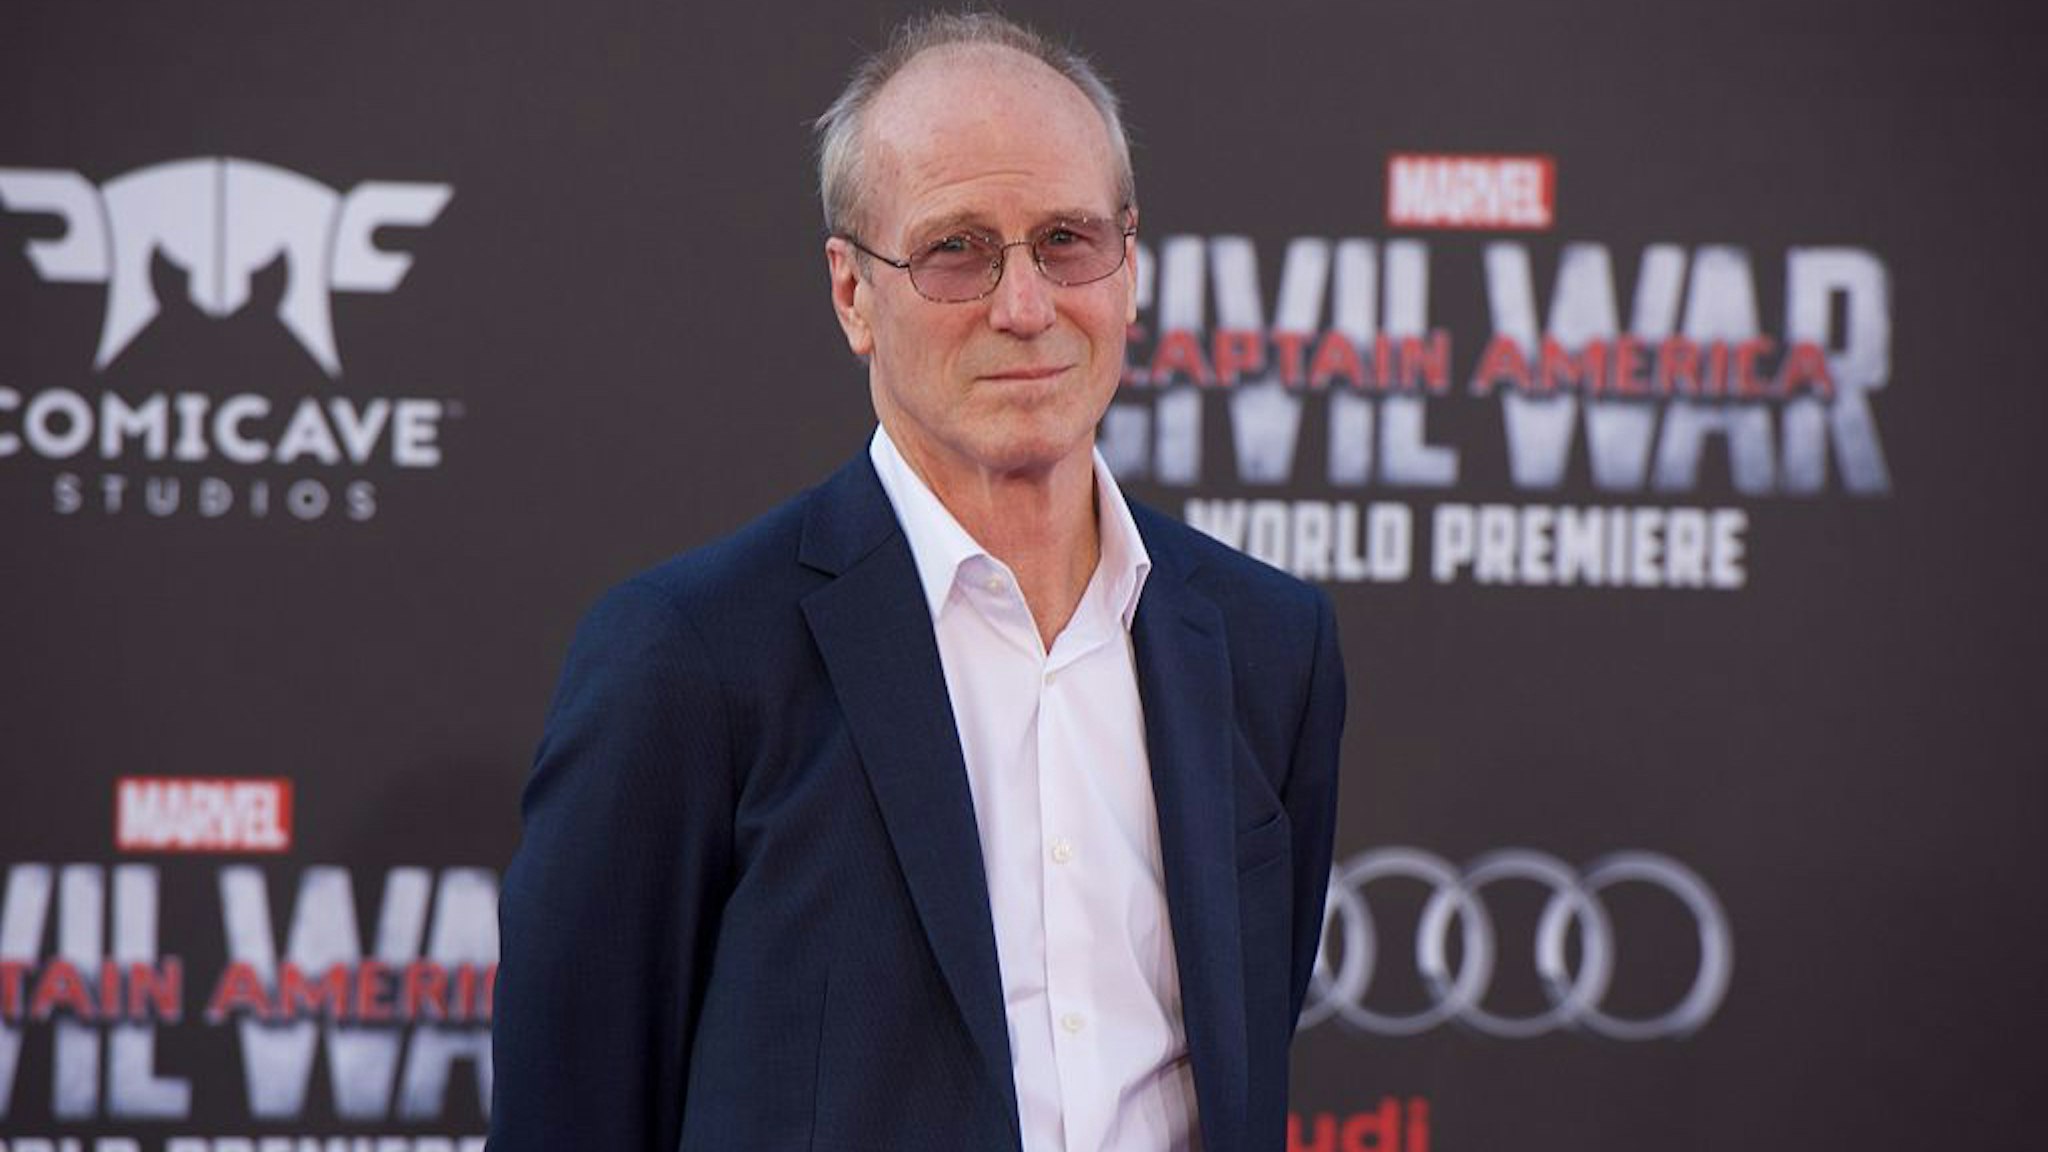 Actor William Hurt attends the Premiere Of Marvel's "Captain America: Civil War" on April 12, 2016 in Hollywood, California.